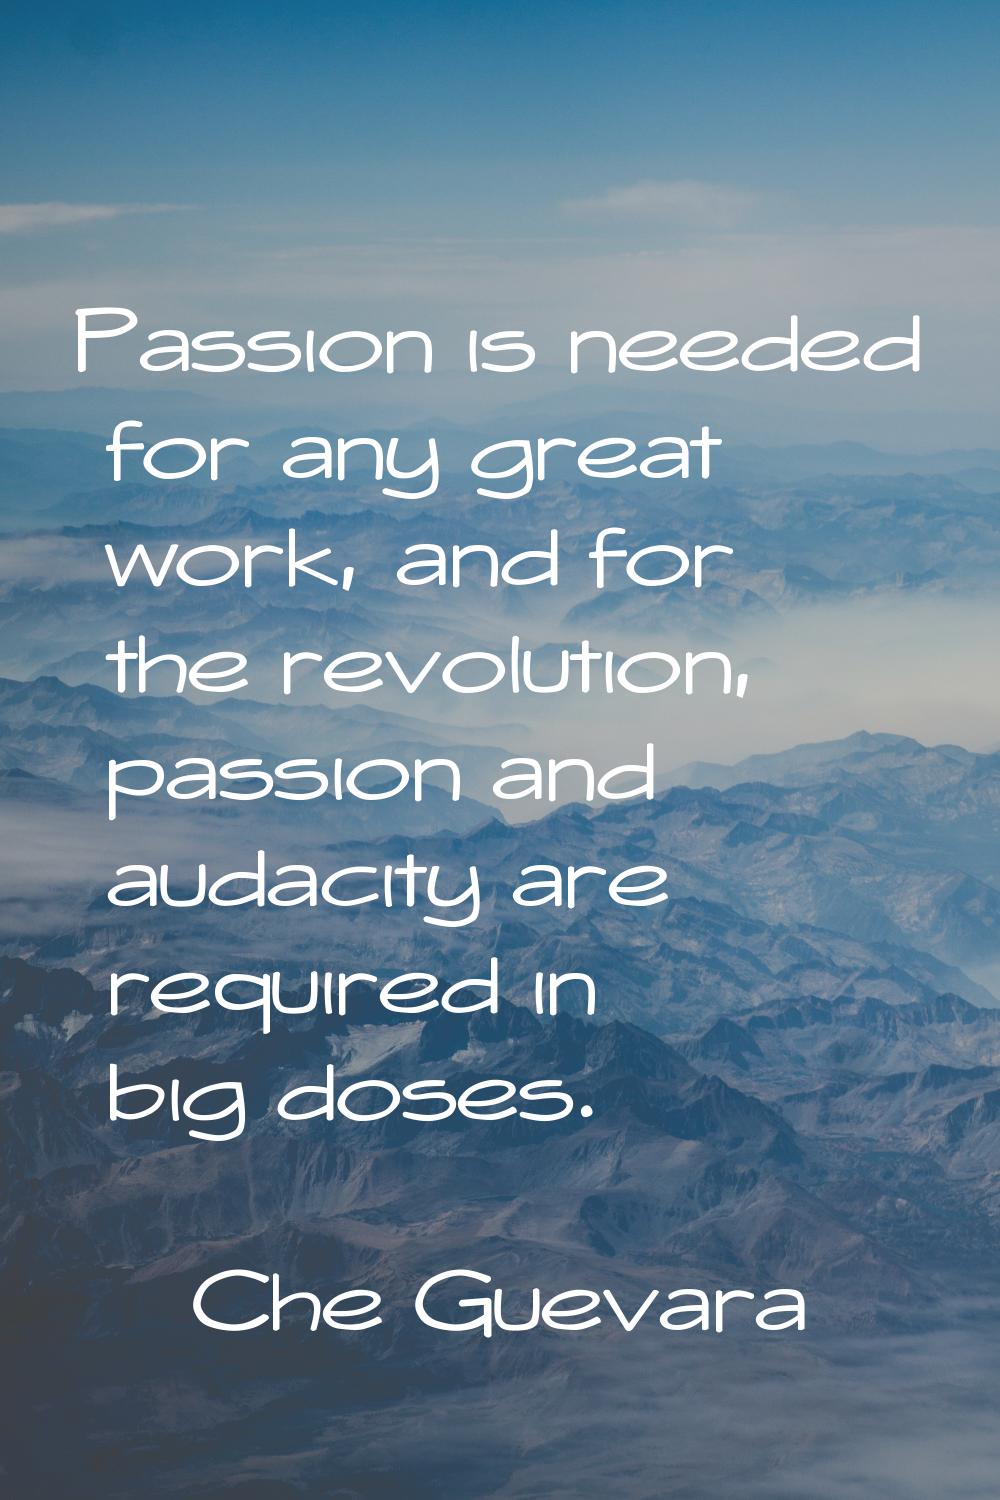 Passion is needed for any great work, and for the revolution, passion and audacity are required in 